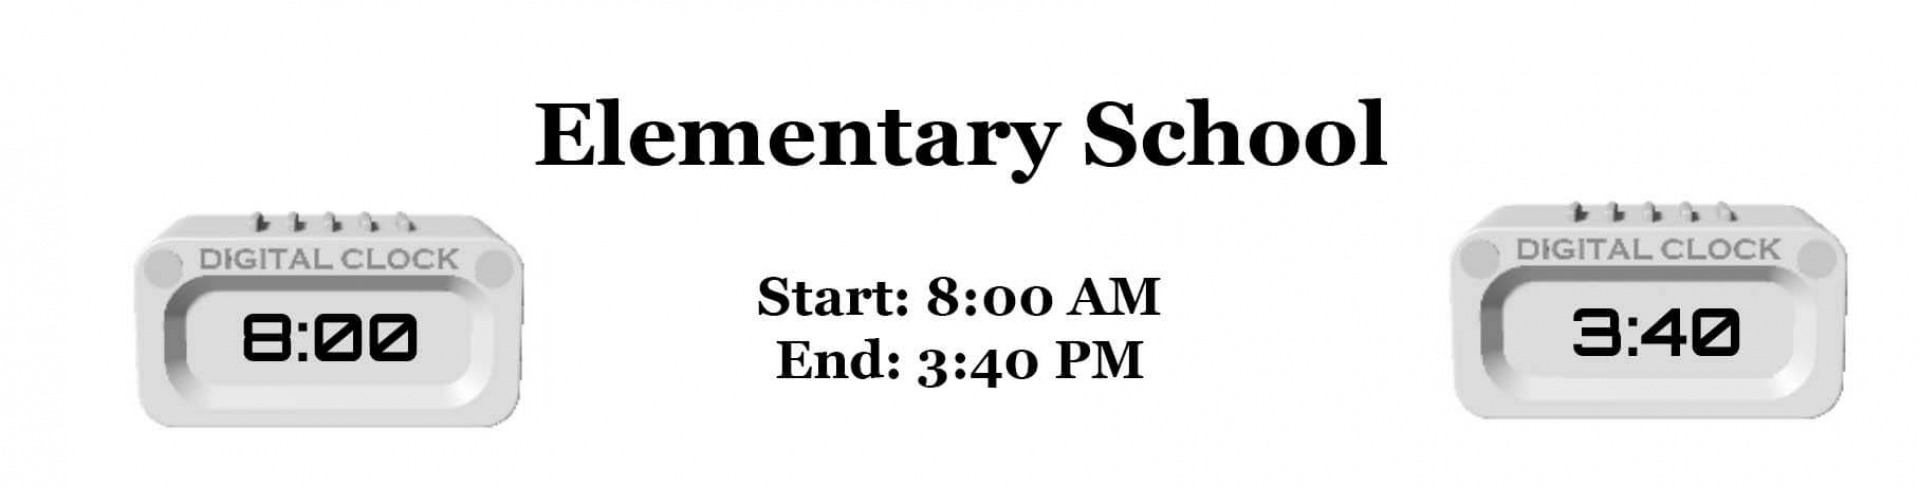 Proposed Elementary School Start and End Time: 8:00 am to 3:40 pm